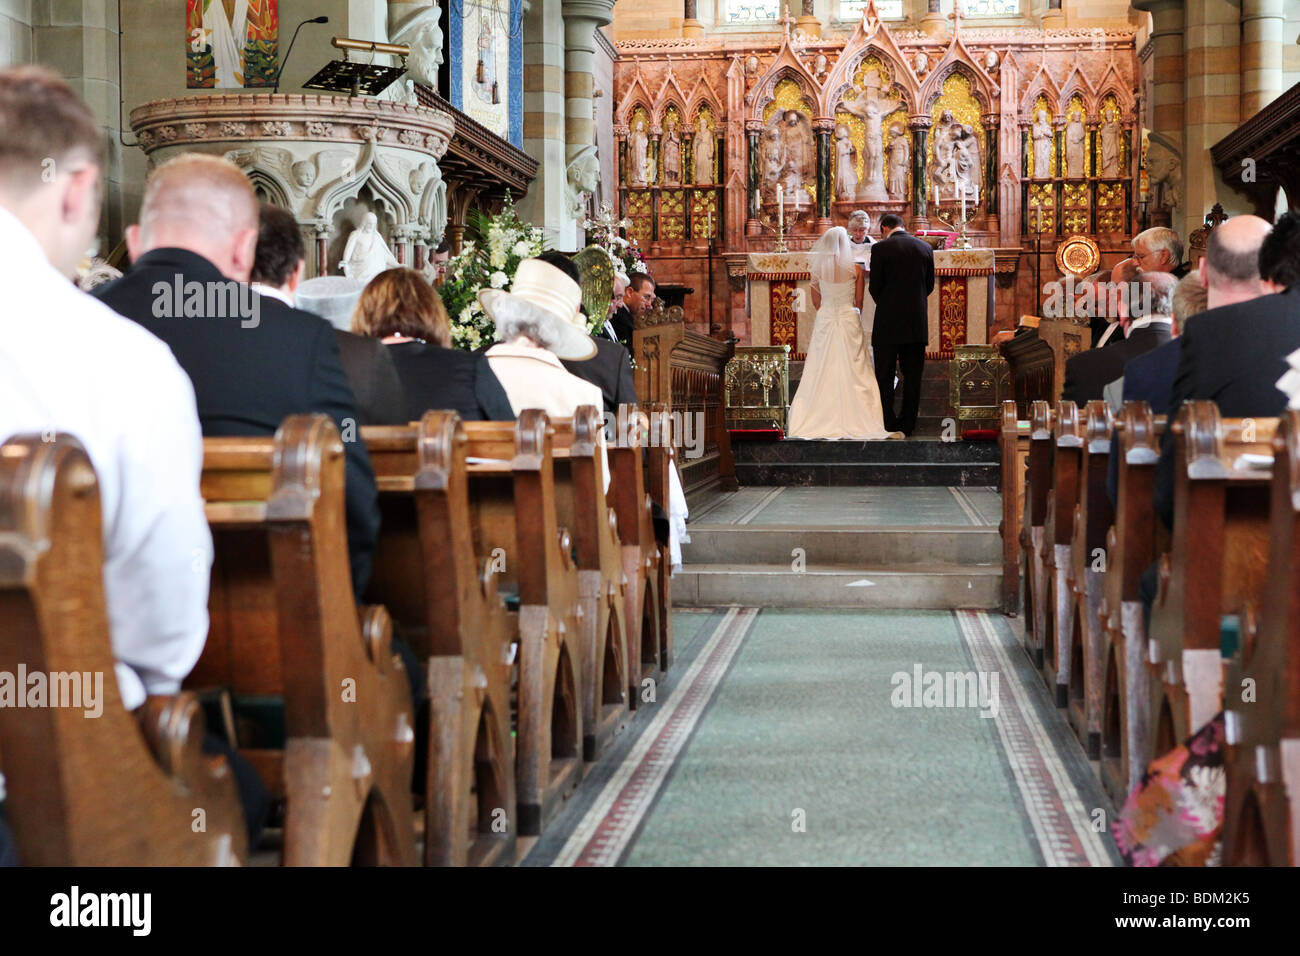 Cathedral like church with bride and groom at altar during traditional religious wedding ceremony in the UK Stock Photo